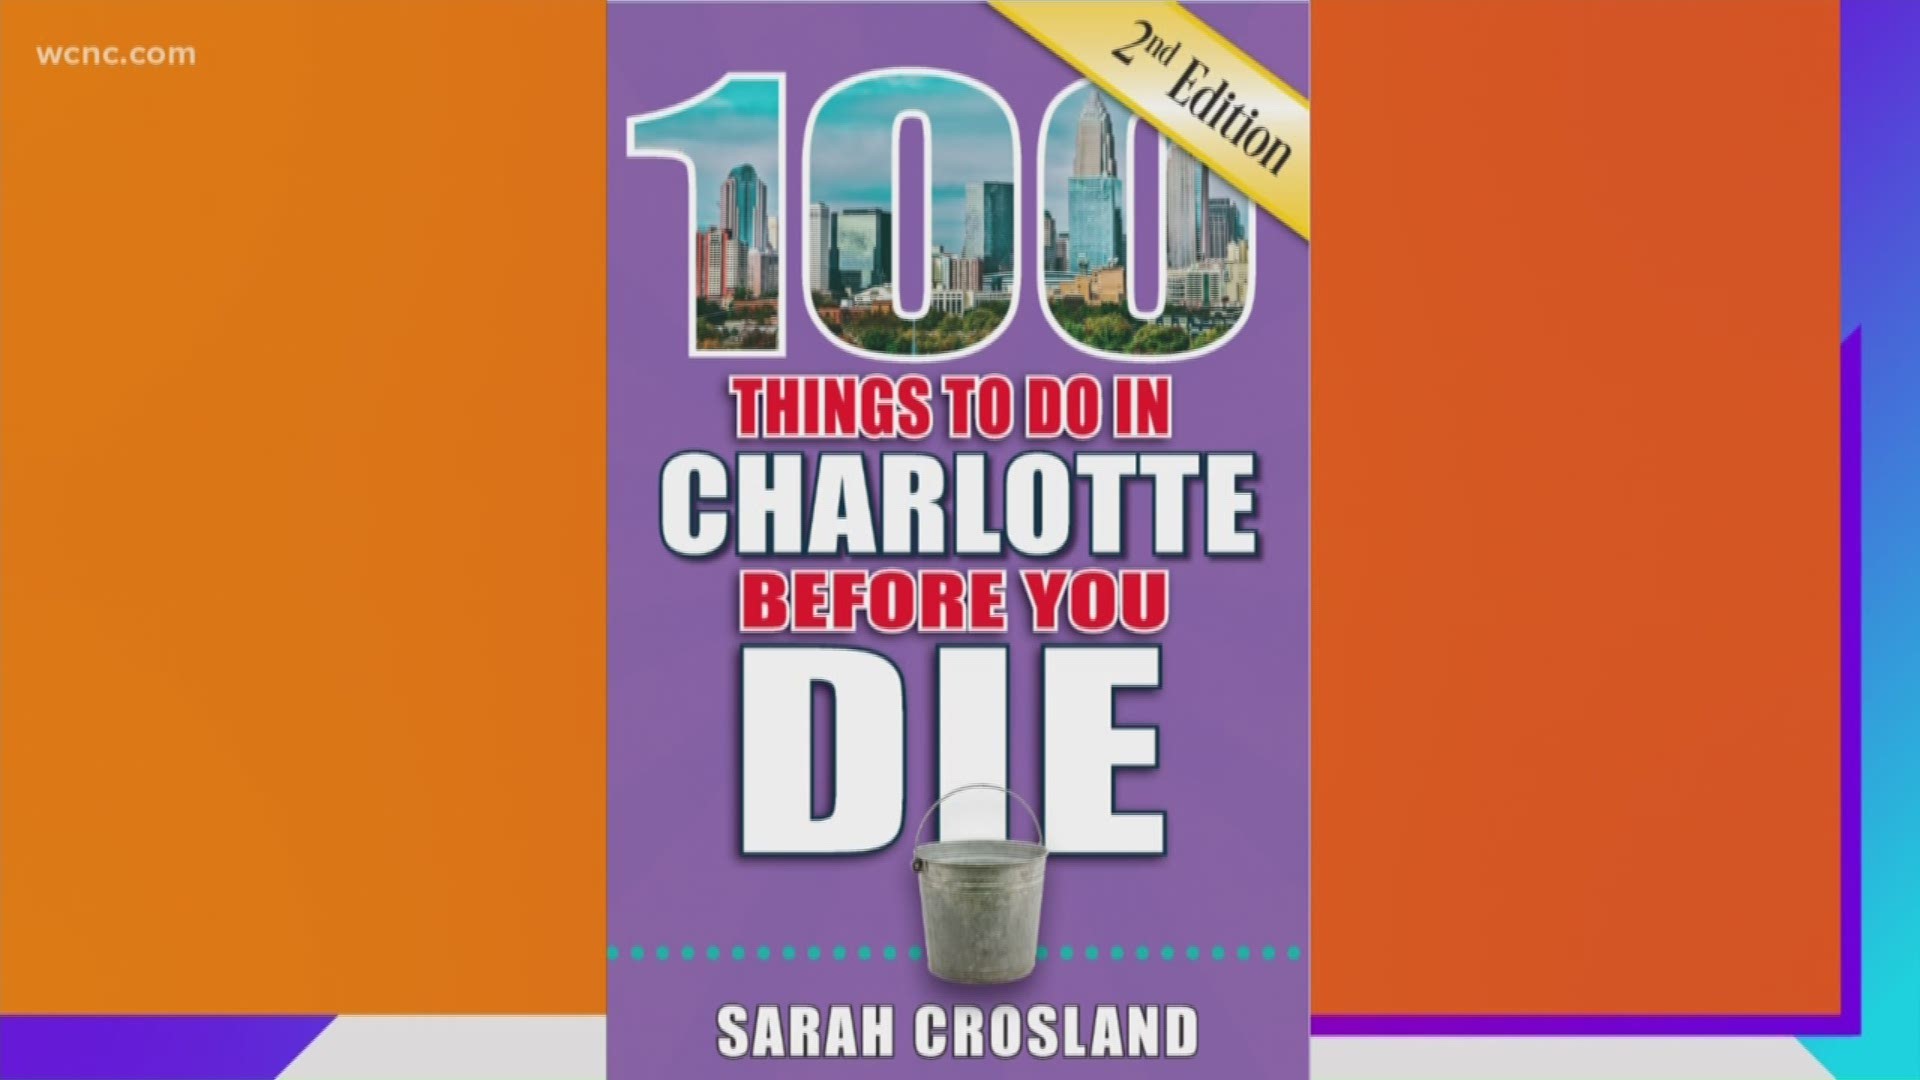 Sarah Crosland, author of “100 Things to Do in Charlotte Before you Die”, shares her favorite restaurants in Charlotte that offer vegan and vegetarian food.